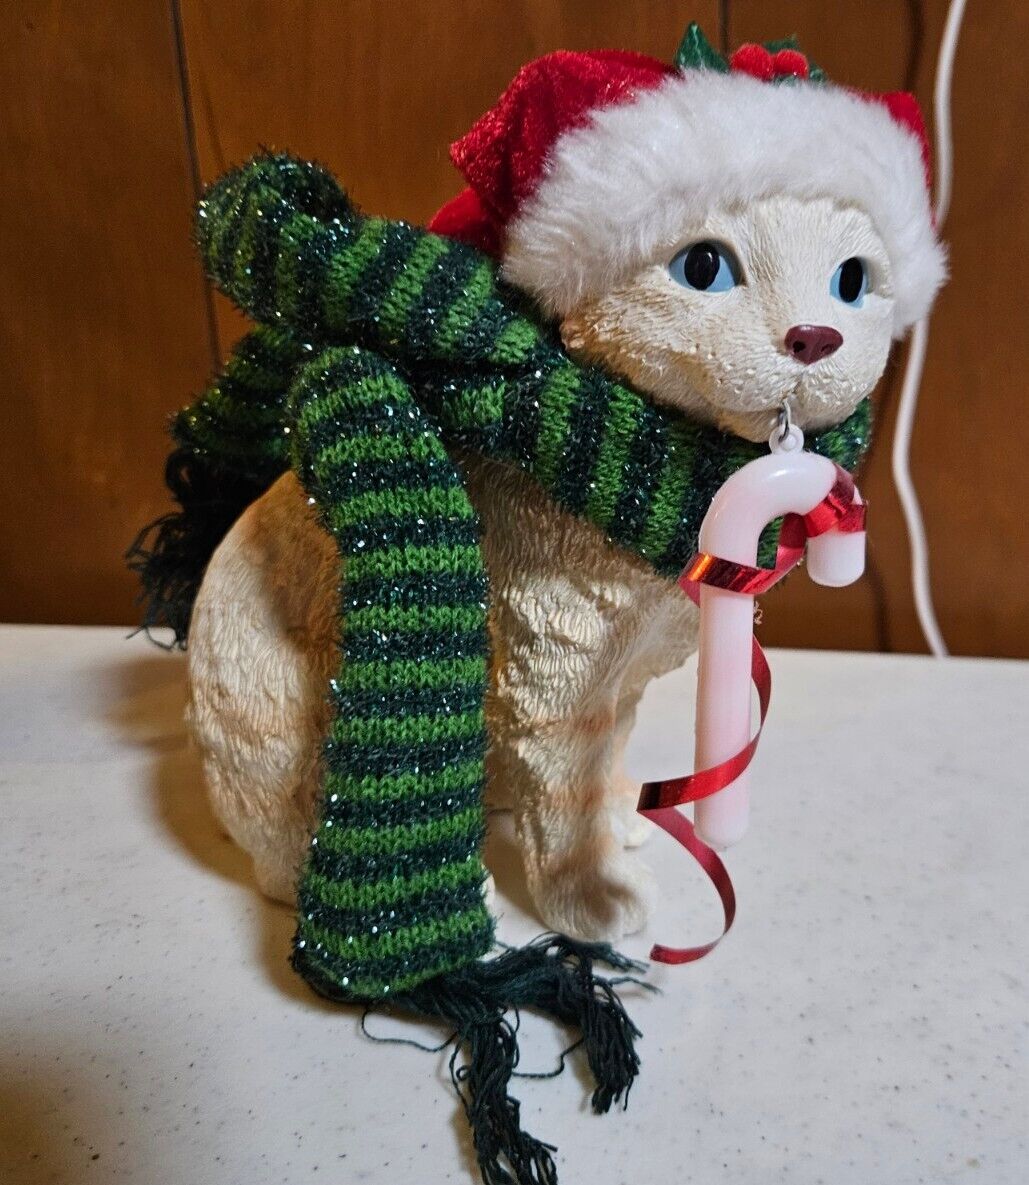 Cat Figurine With Santa Hat And Green Striped Scarf, Candy Cane